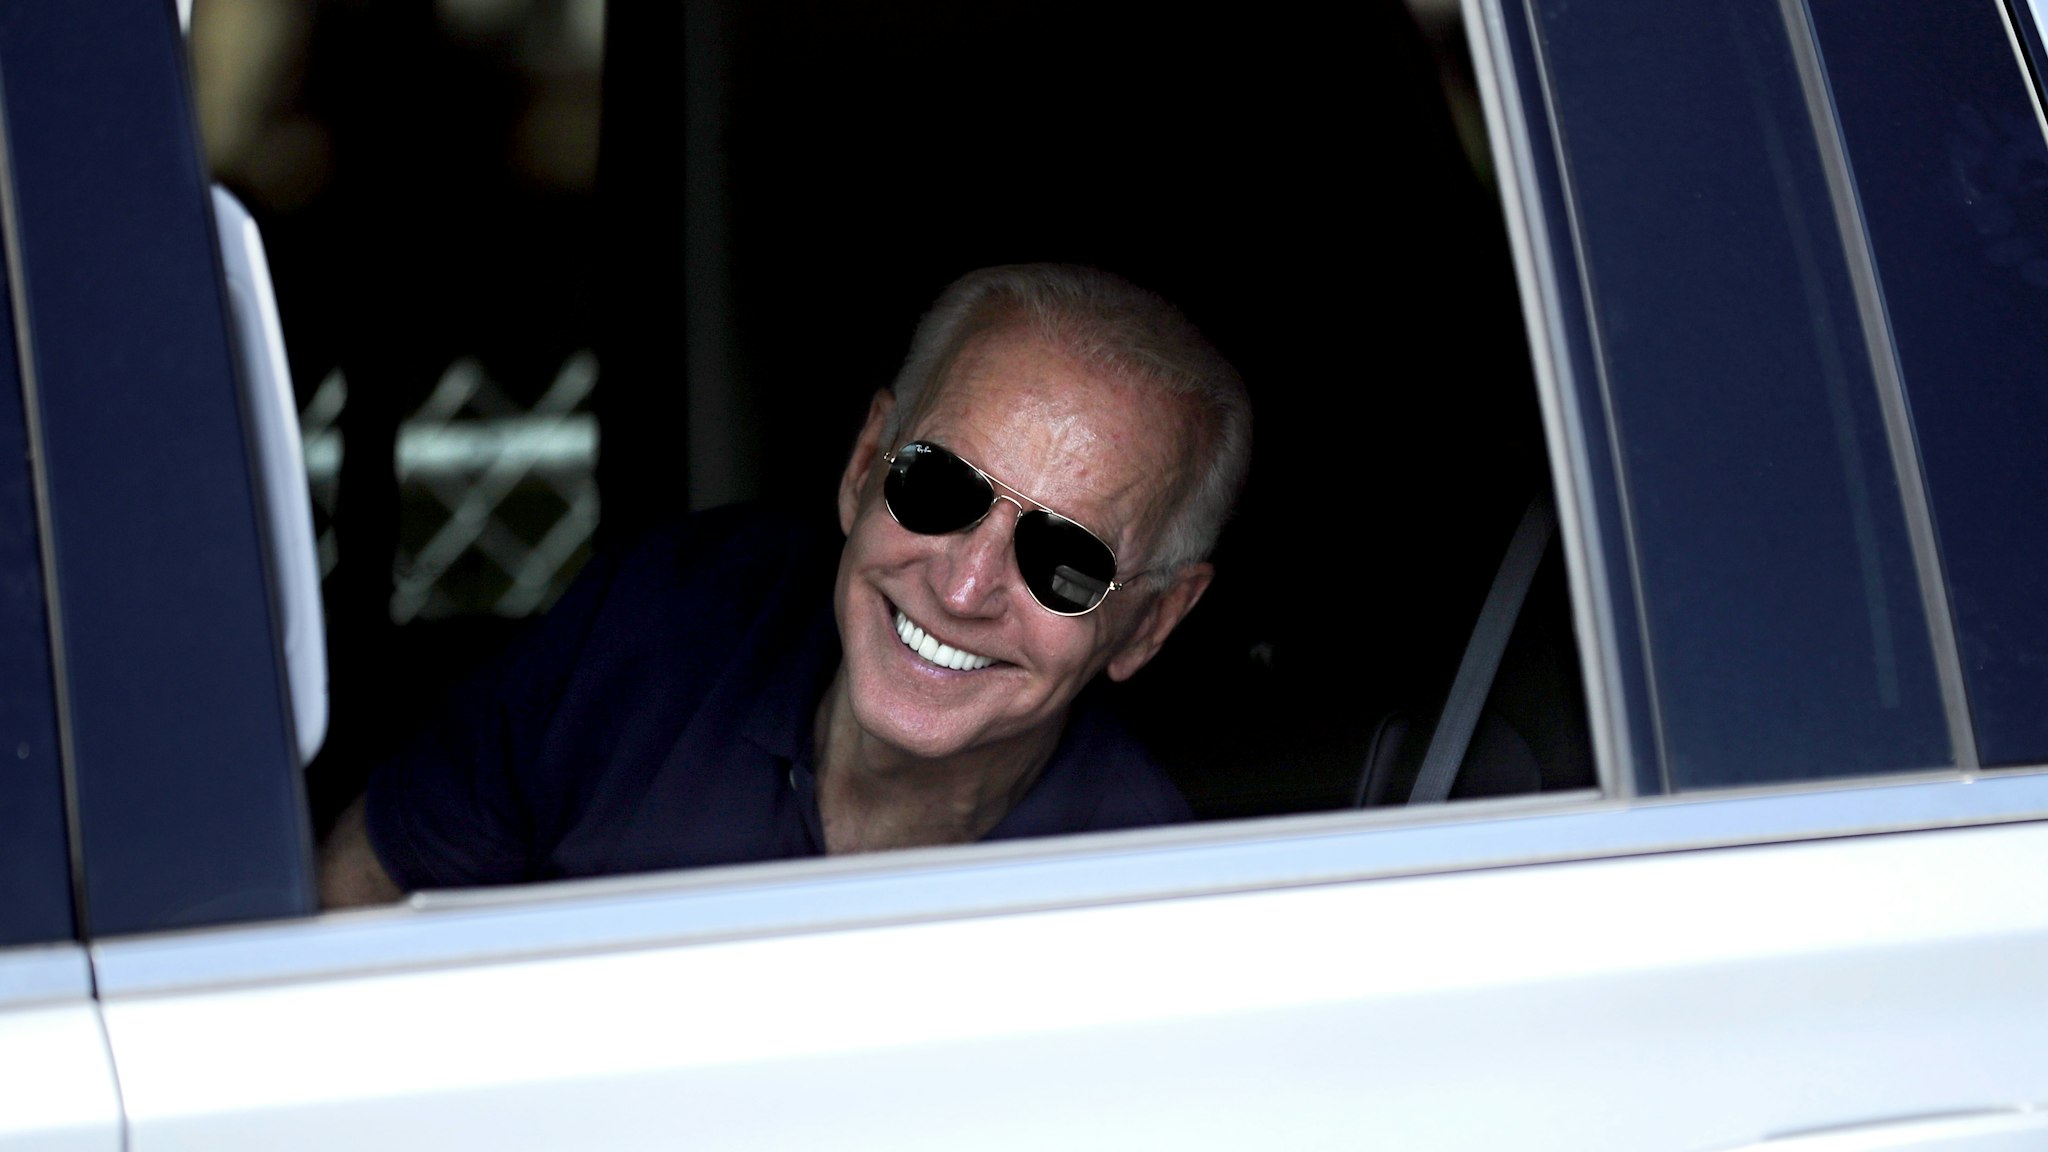 DES MOINES, IOWA - AUGUST 08: Democratic presidential candidate and former Vice President Joe Biden rolls down the window of his truck to say goodbye to supporters as he leaves the Iowa State Fair August 08, 2019 in Des Moines, Iowa. 22 of the 23 politicians seeking the Democratic Party presidential nomination will be visiting the fair this week, six months ahead of the all-important Iowa caucuses.